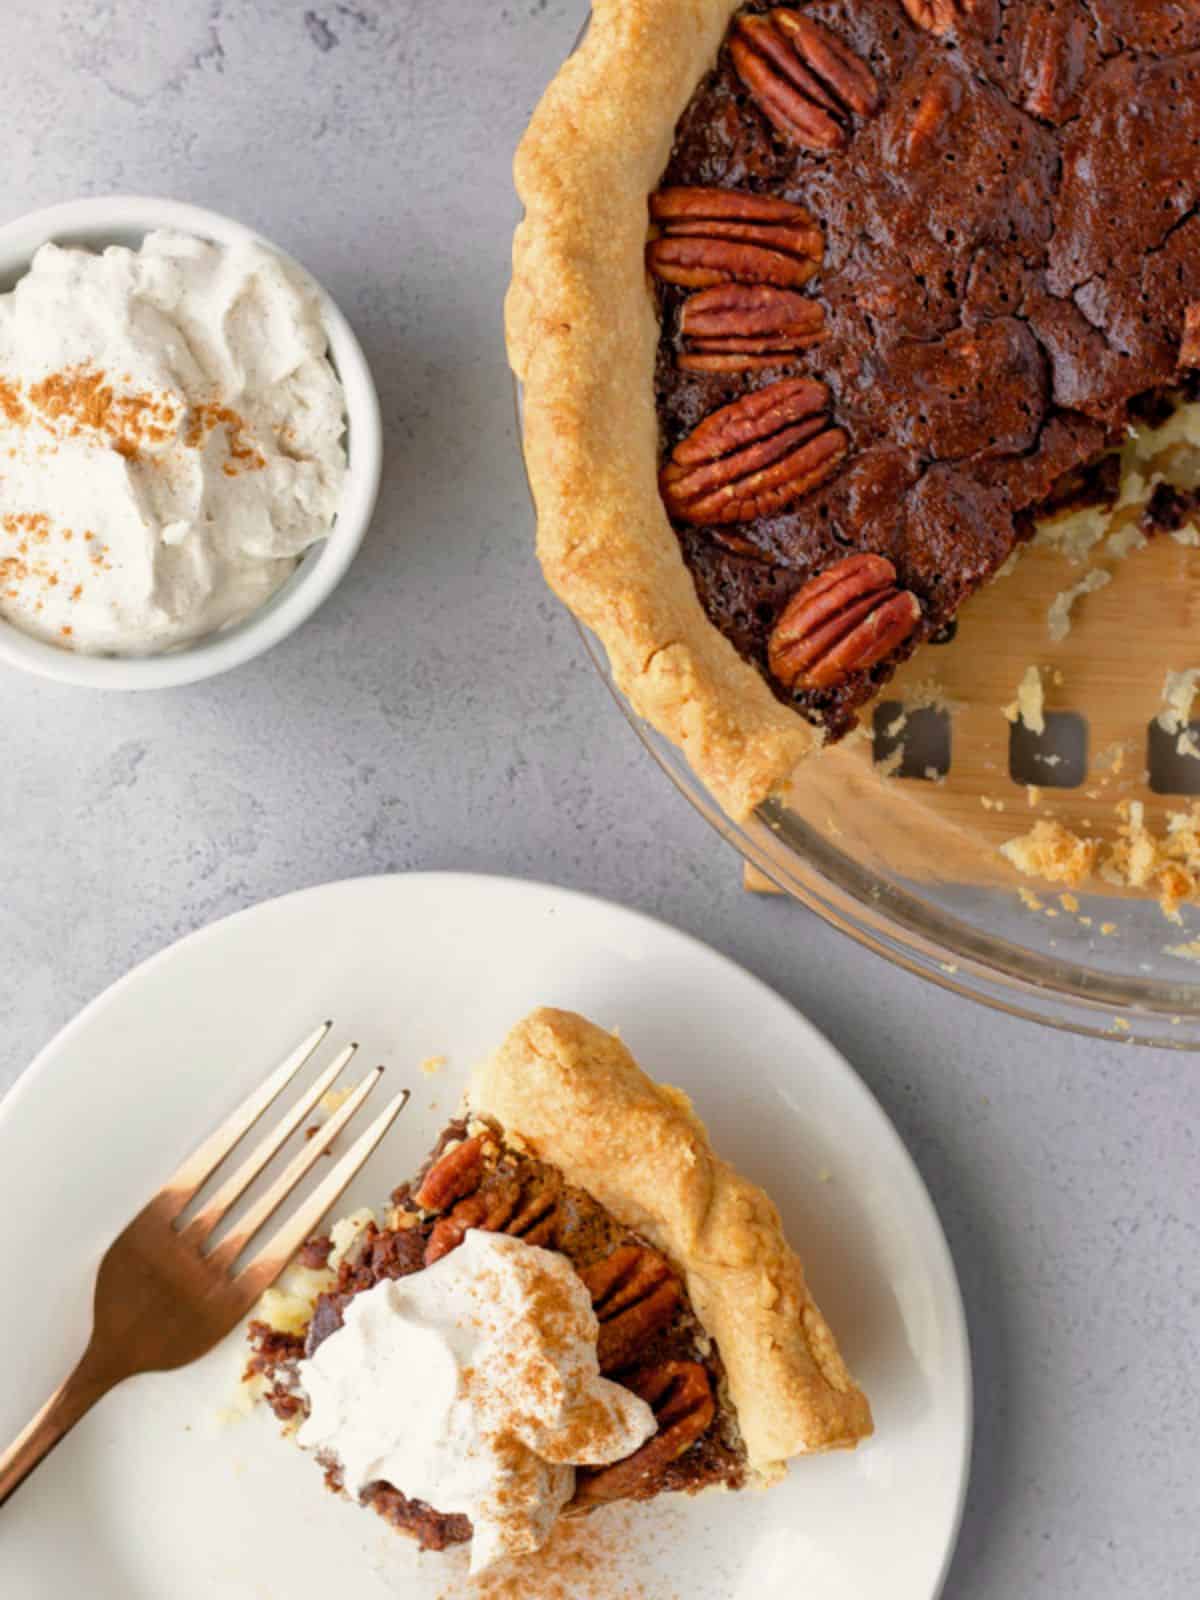 Mexican chocolate pecan pie with a slice on a plate and the rest in the pie dish.